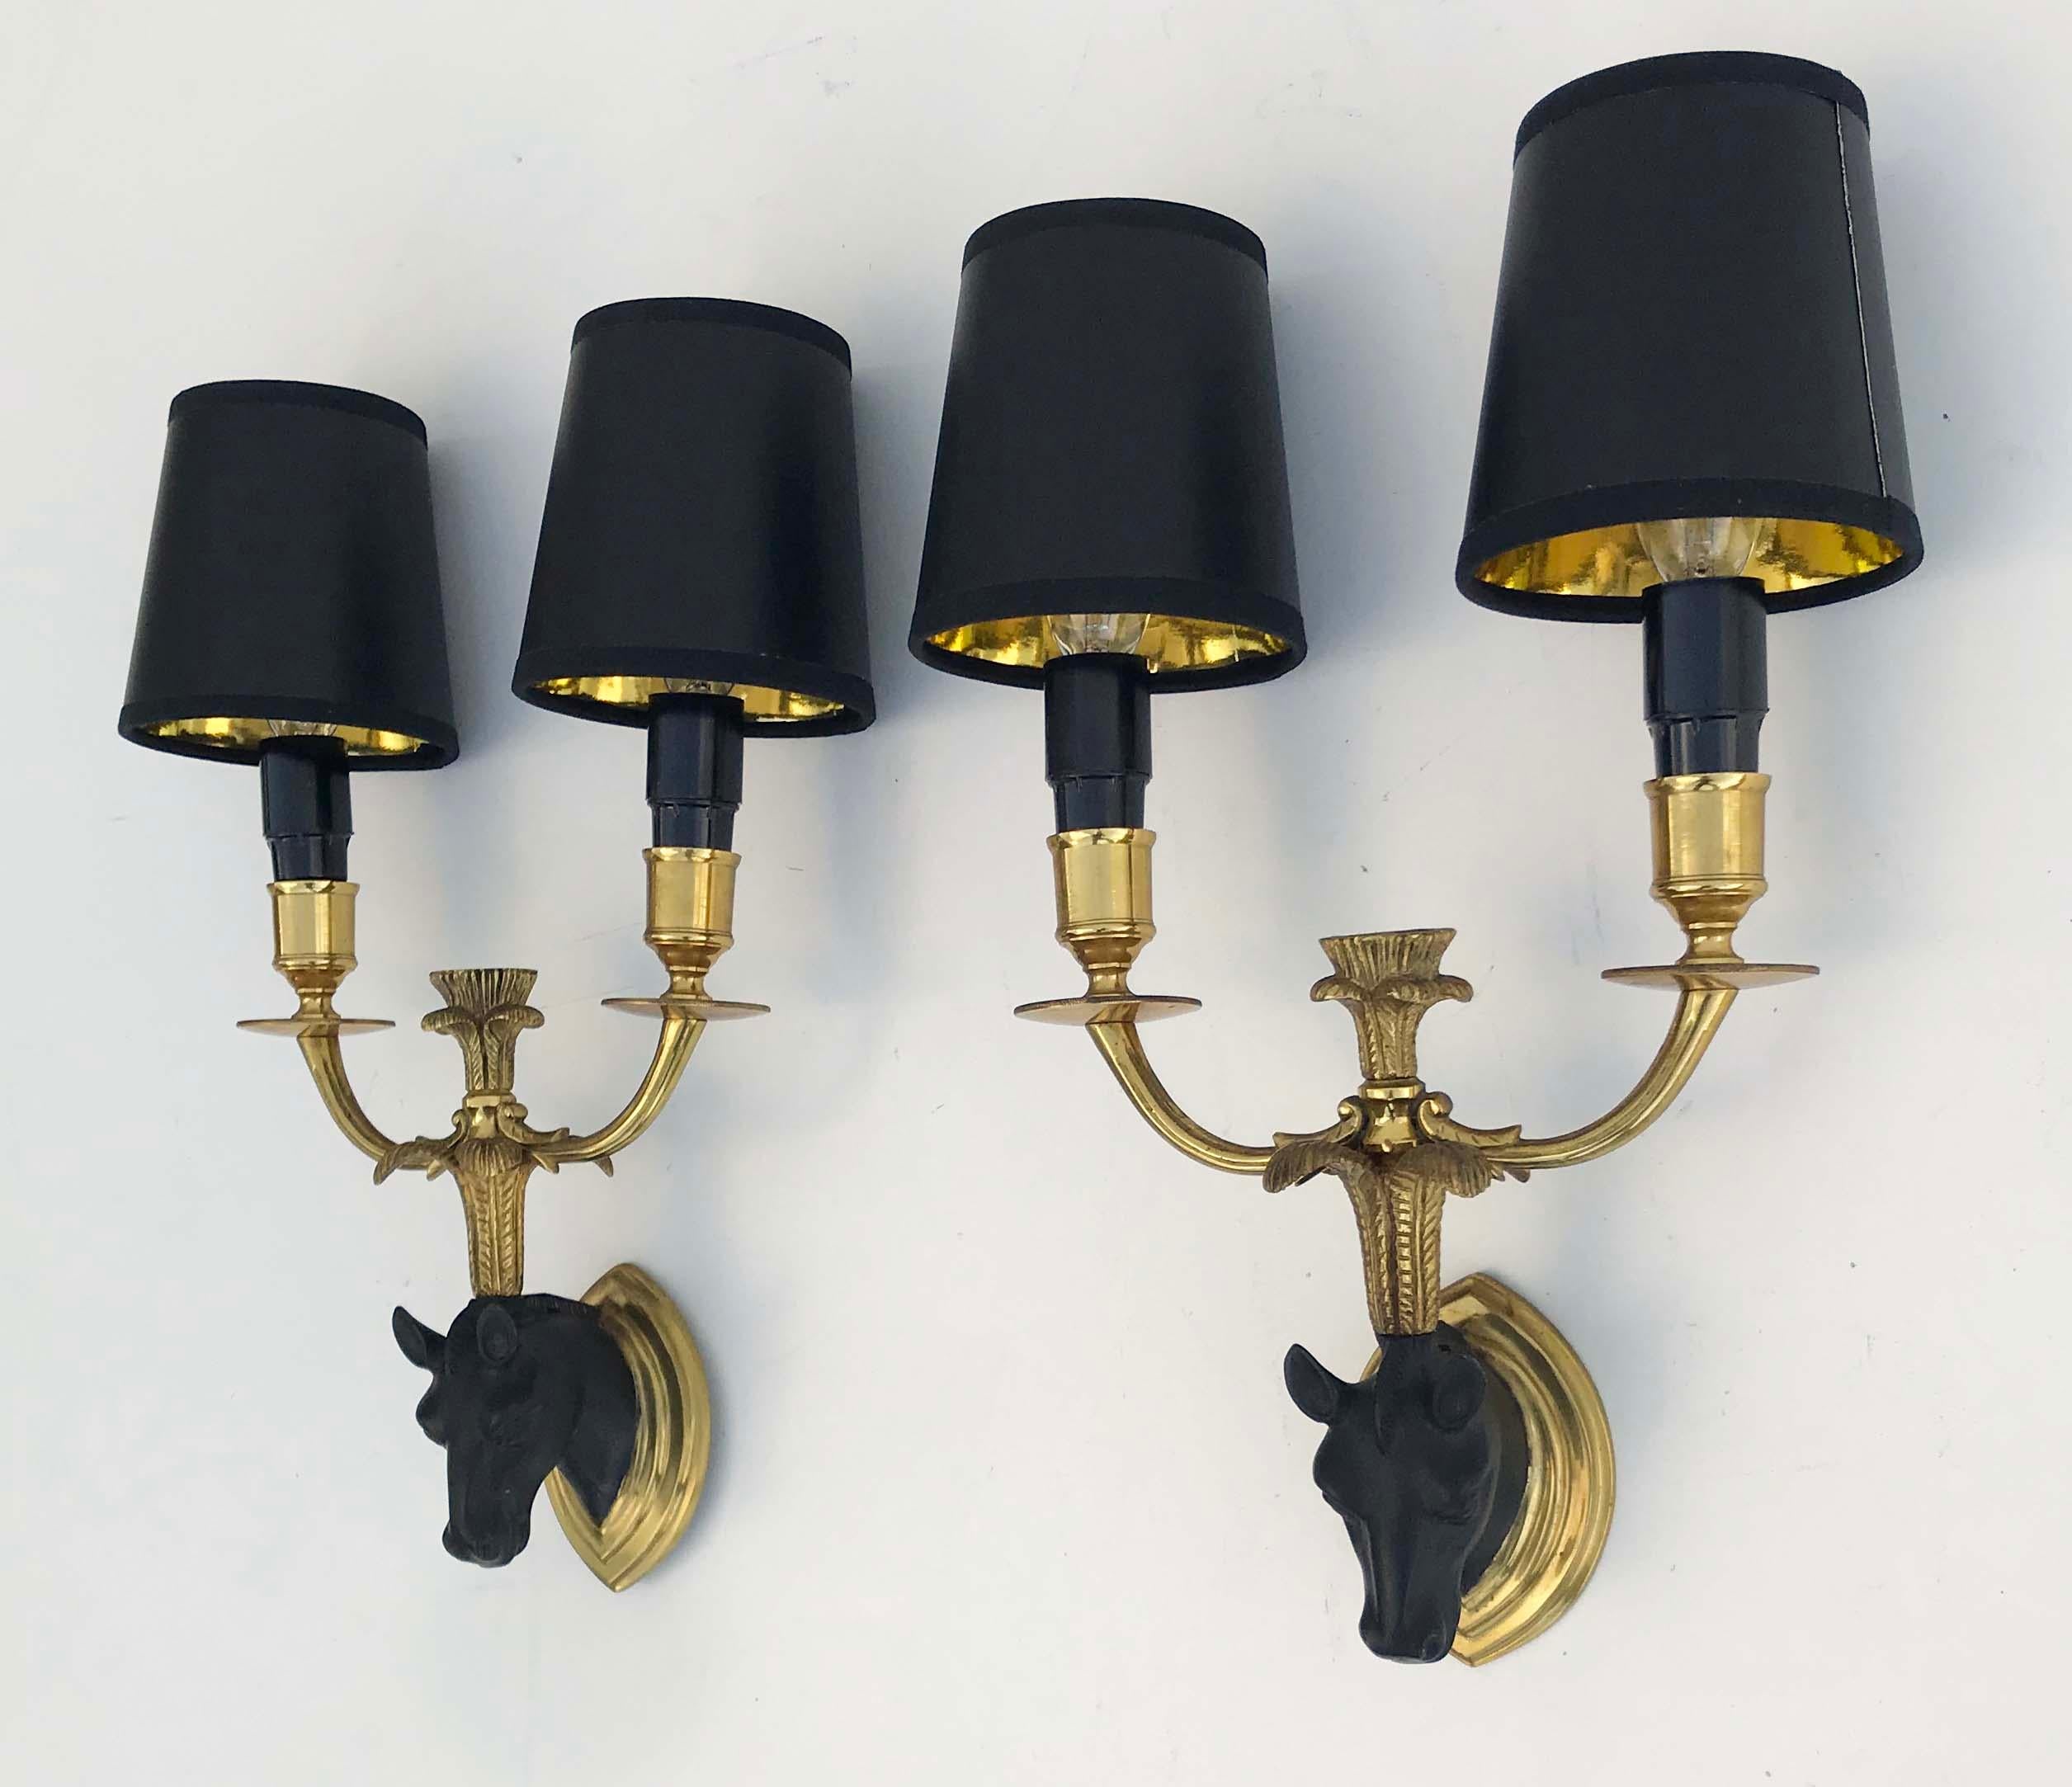 Superb pair of Maison Baguès “ Horse “ sconces
2 lights, 40 watts max bulb per light 
US Rewired and in working condition 
Custom backplate available.

Measures: Back plate: 4